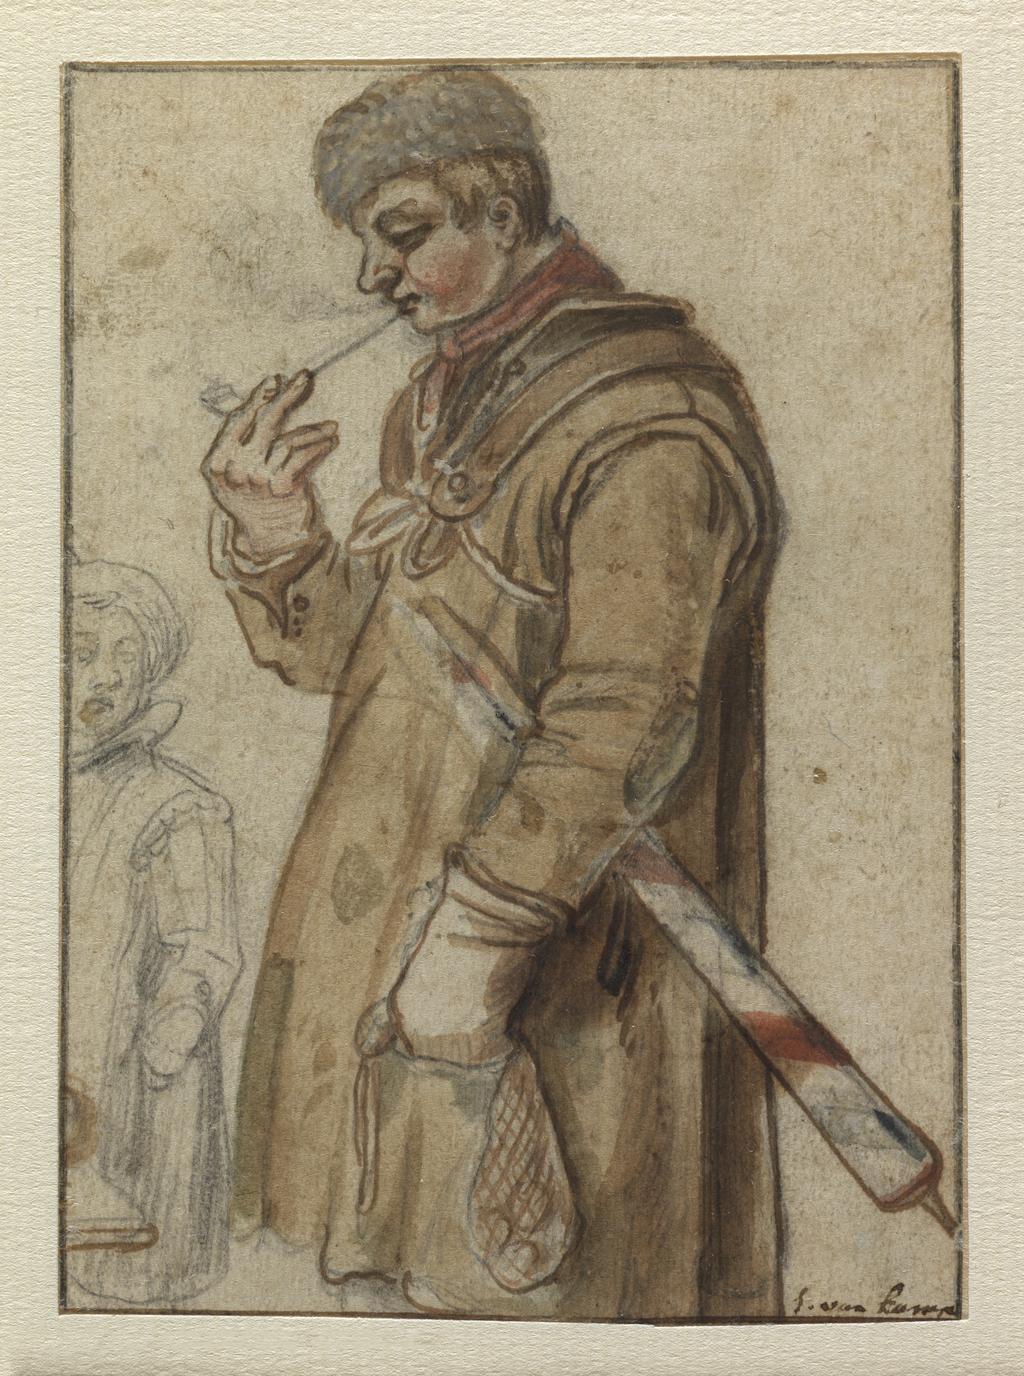 An image of A barber smoking a pipe. Avercamp, Hendrick (Dutch, 1585-1634). Pen and brown ink with watercolour over black chalk, with some bodycolour and a line of brown ink bordering it on all sides, on paper, height 100 mm, width 72 mm.